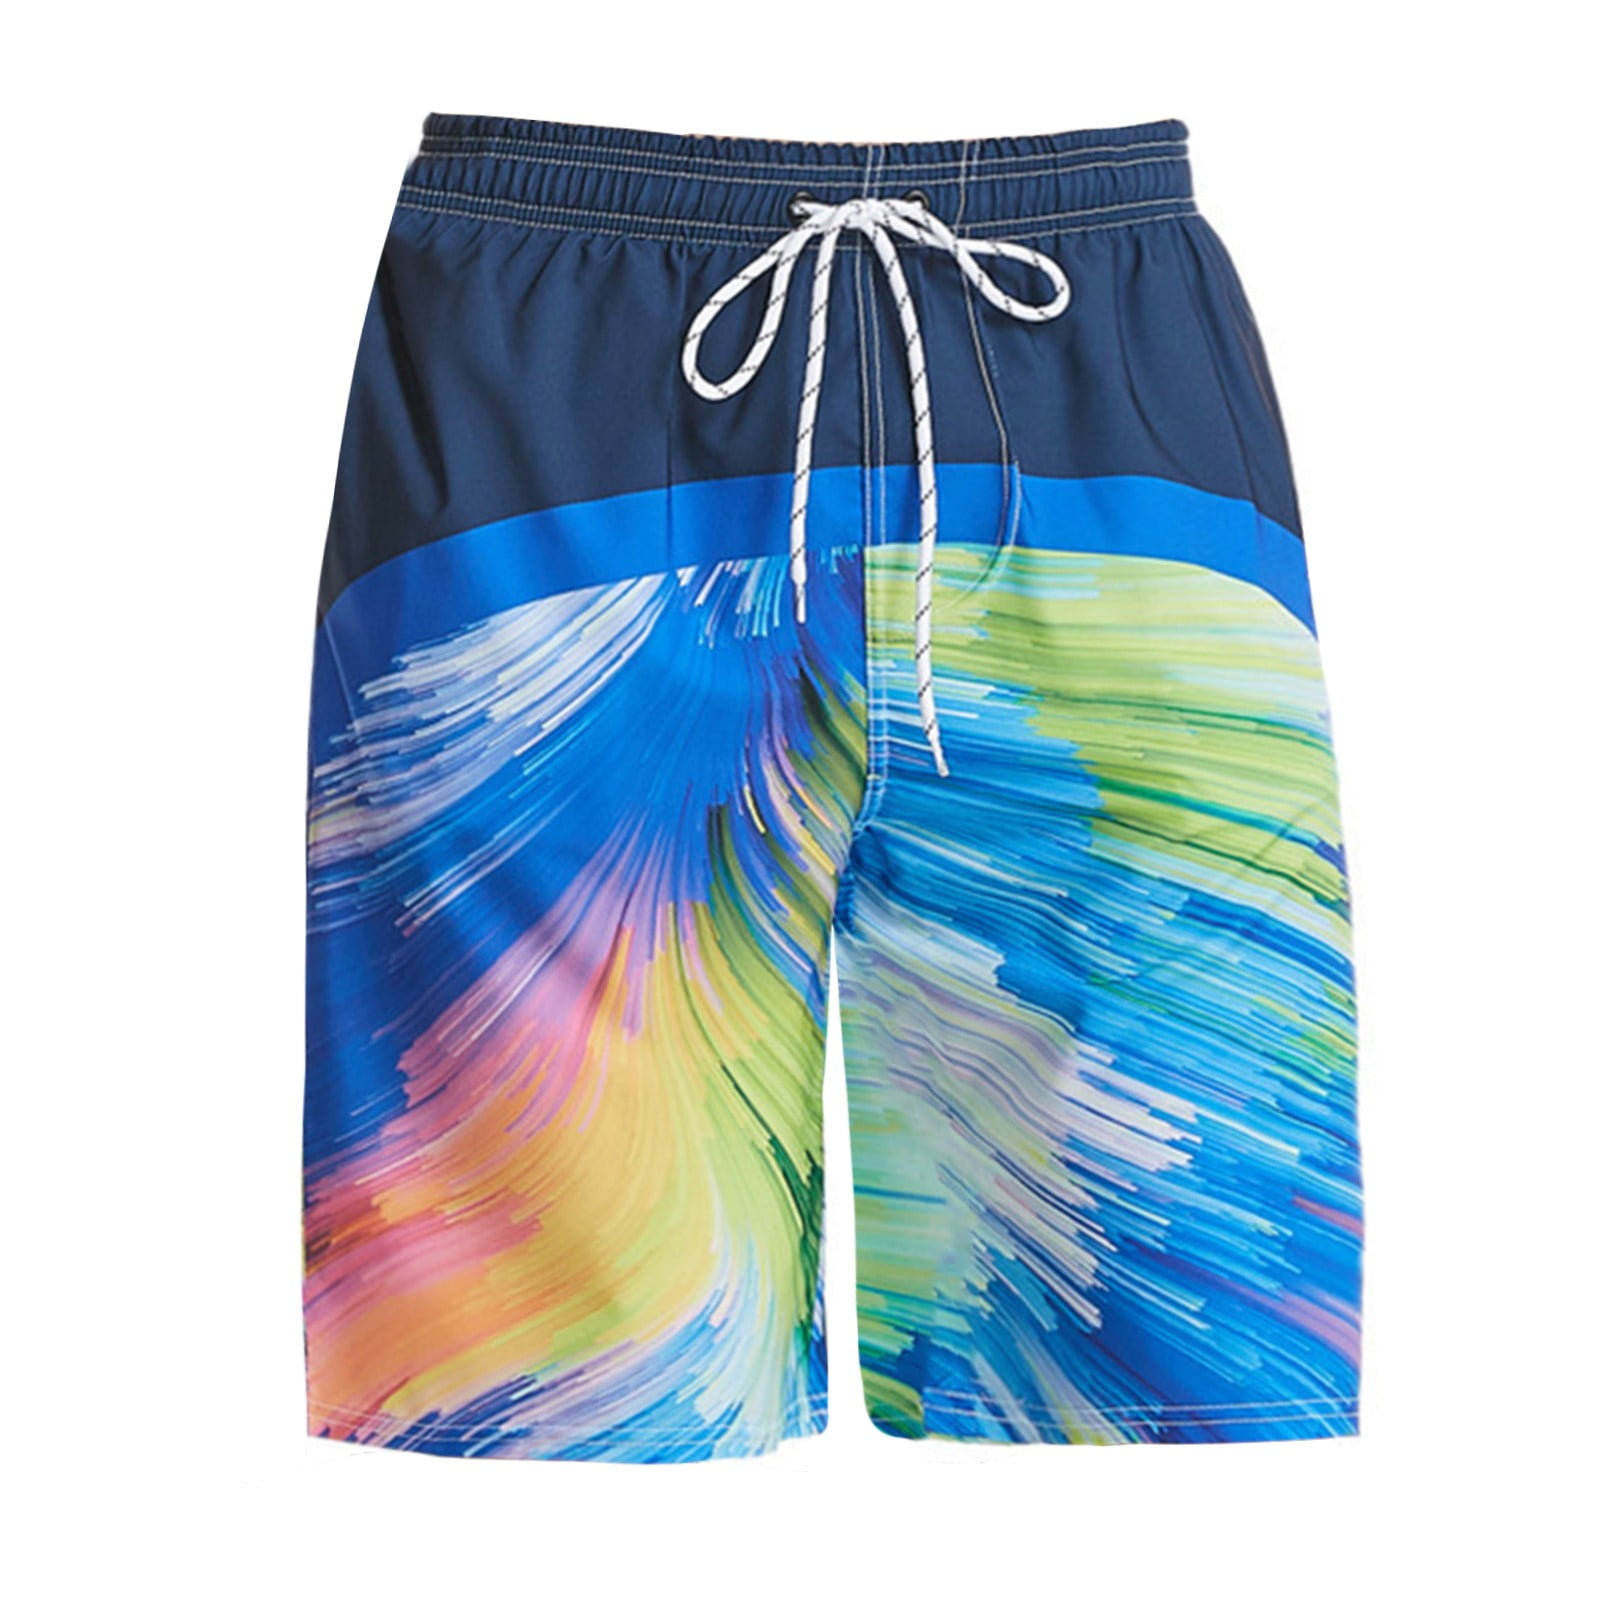 ASEIDFNSA Shorts With Pockets Mens Swimming Trunks Below Knee Quick ...